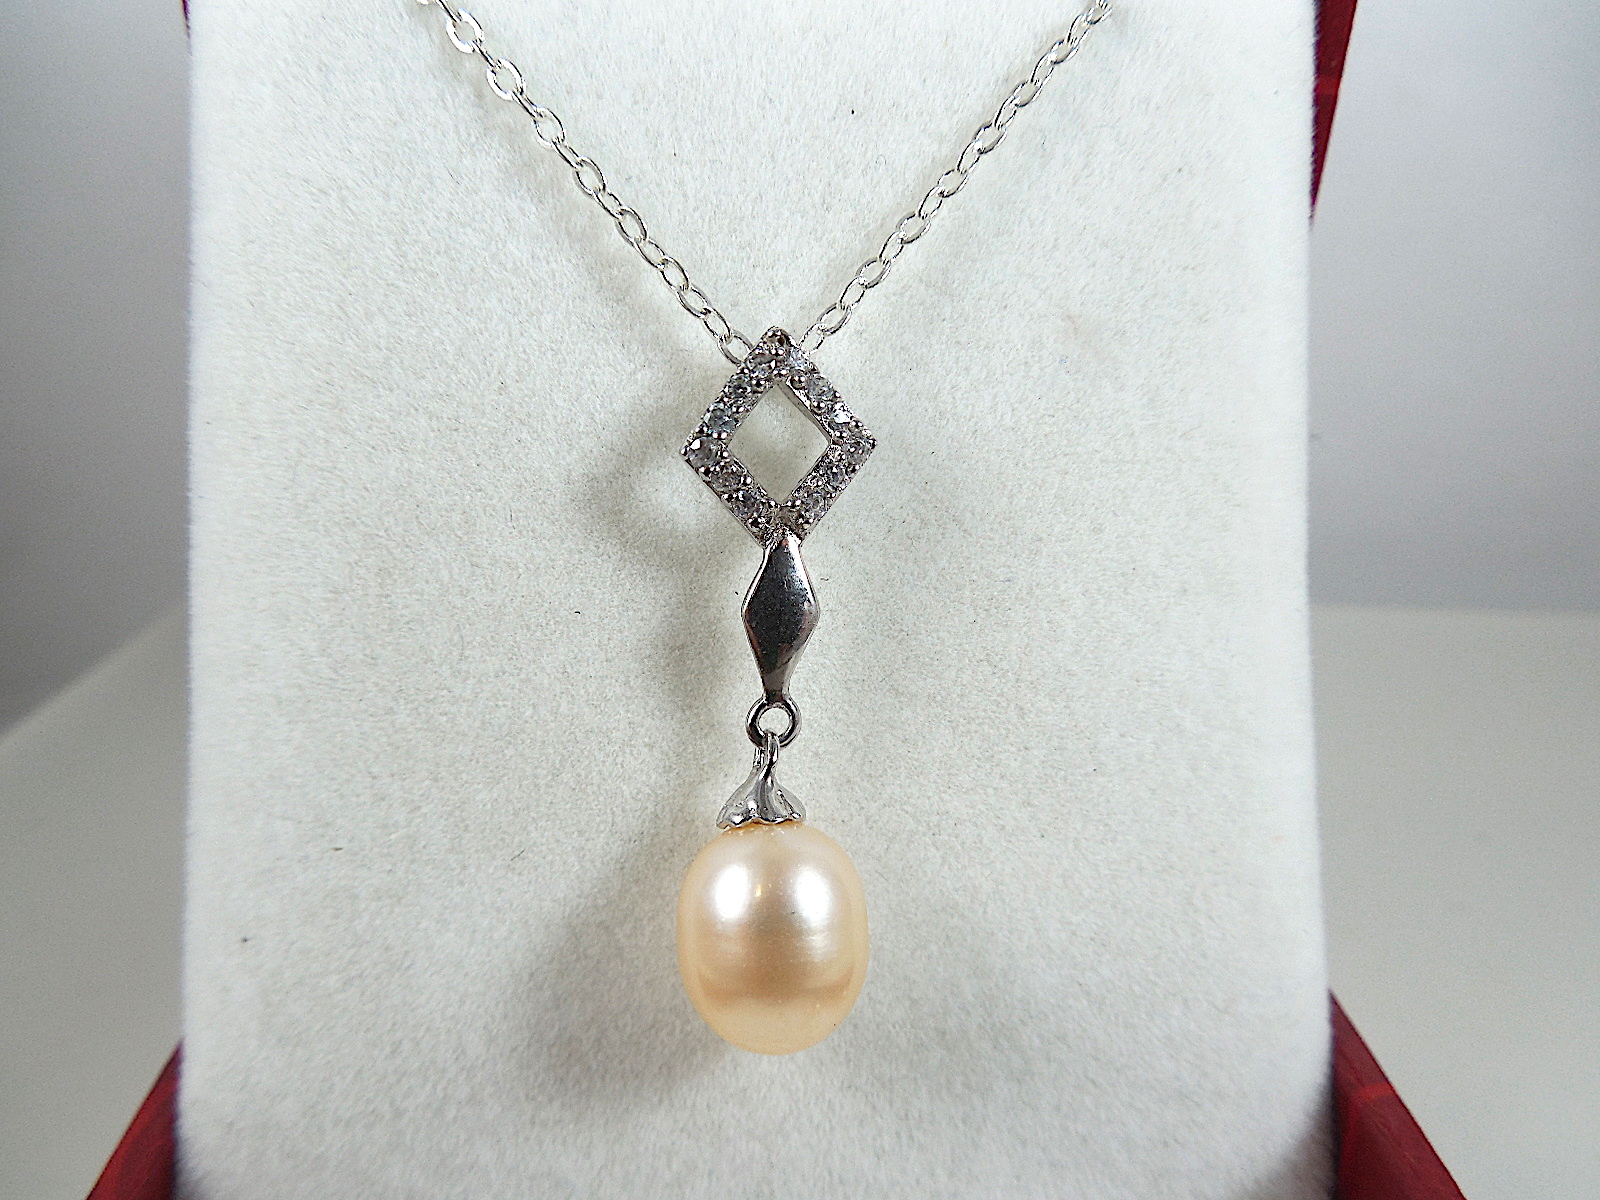 Silver necklace with Pearl pendant - Image 2 of 5